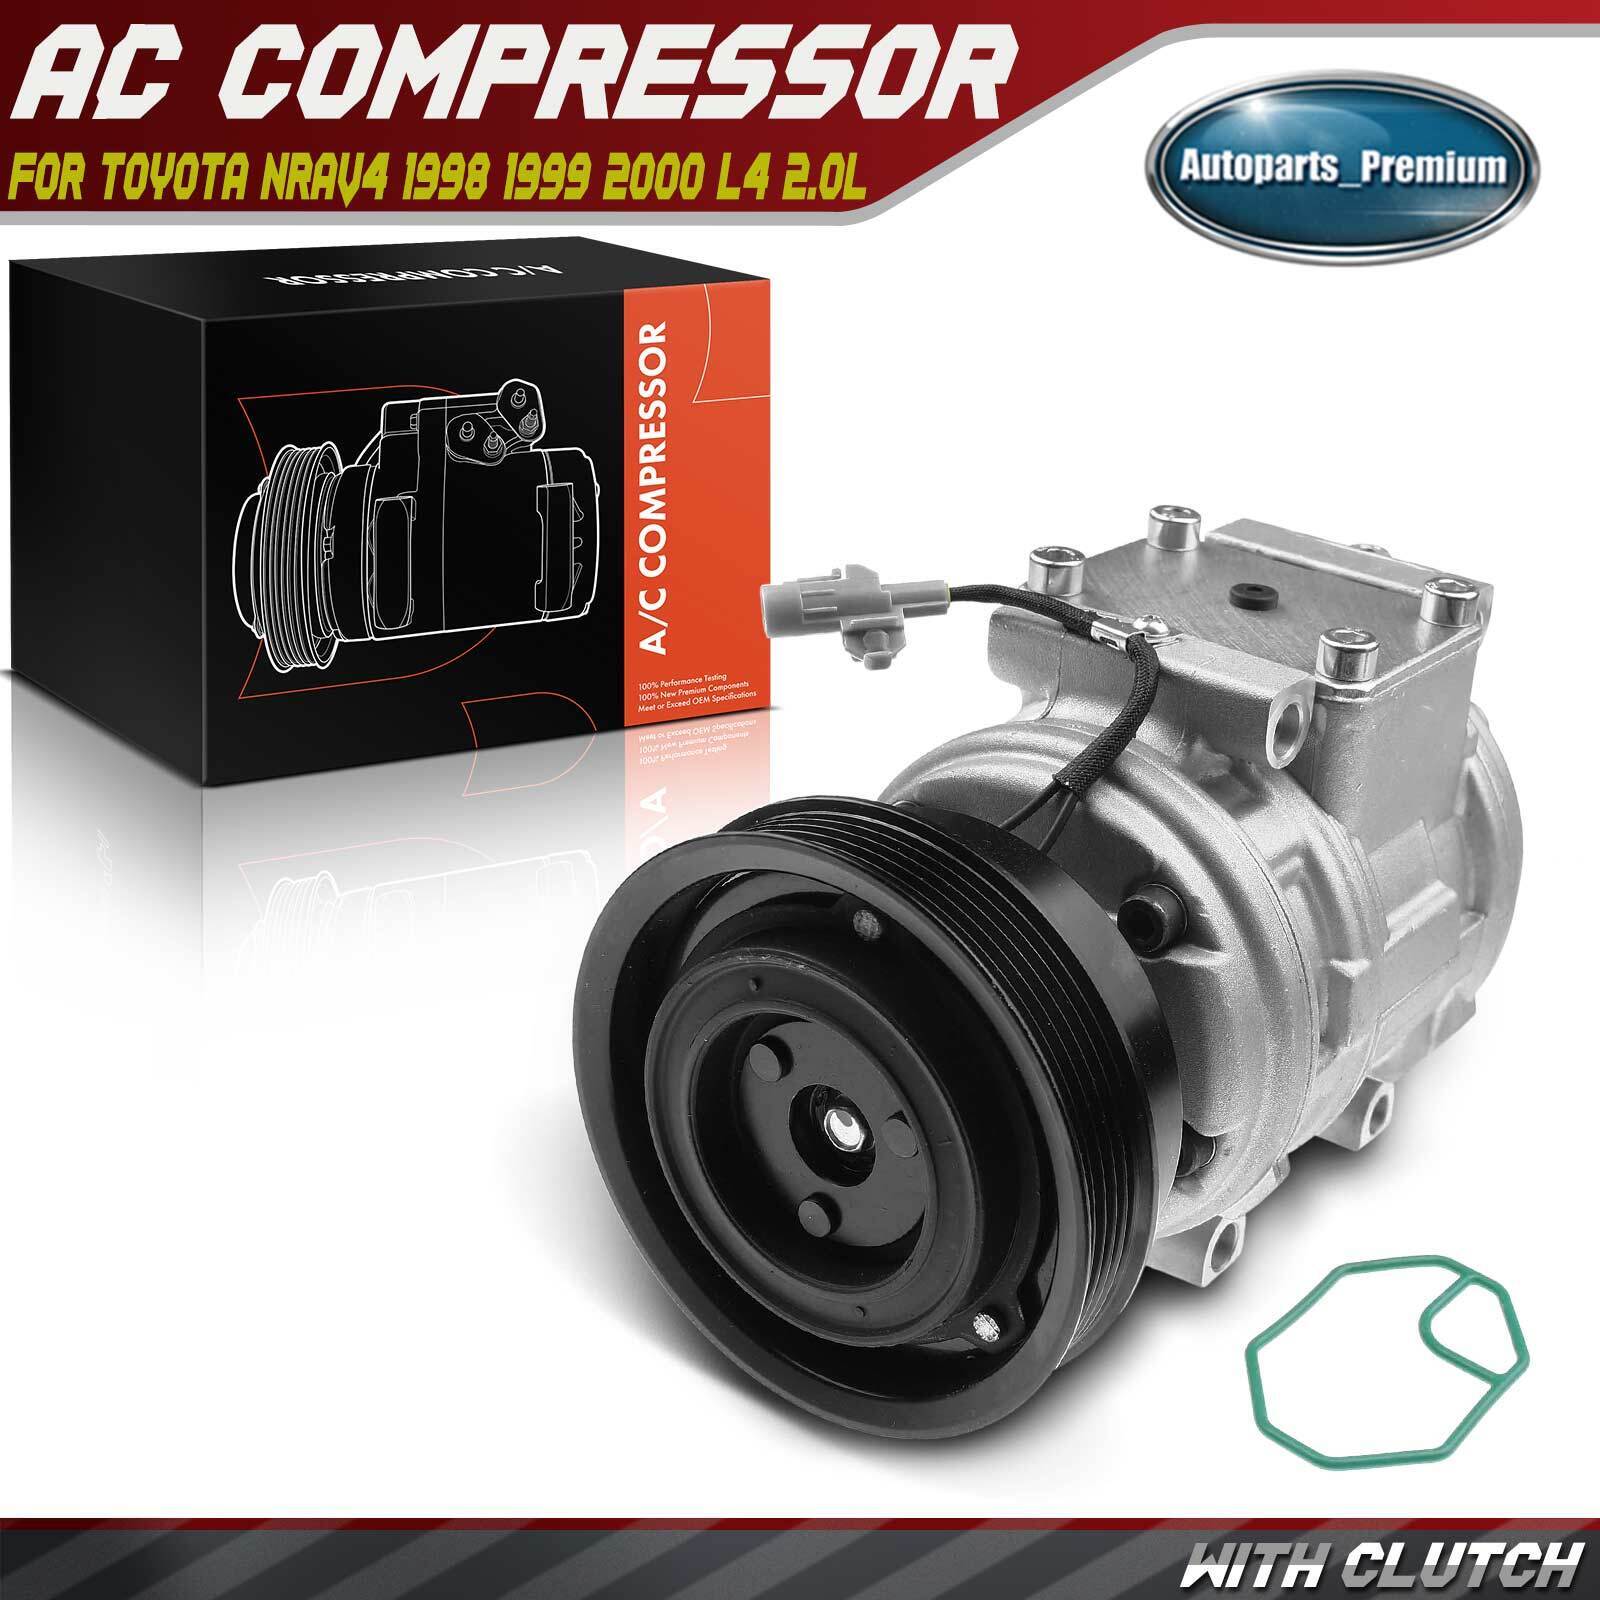 New AC Compressor with Clutch for Toyota RAV4 1998 1999 2000 L4 2.0L 8832042050